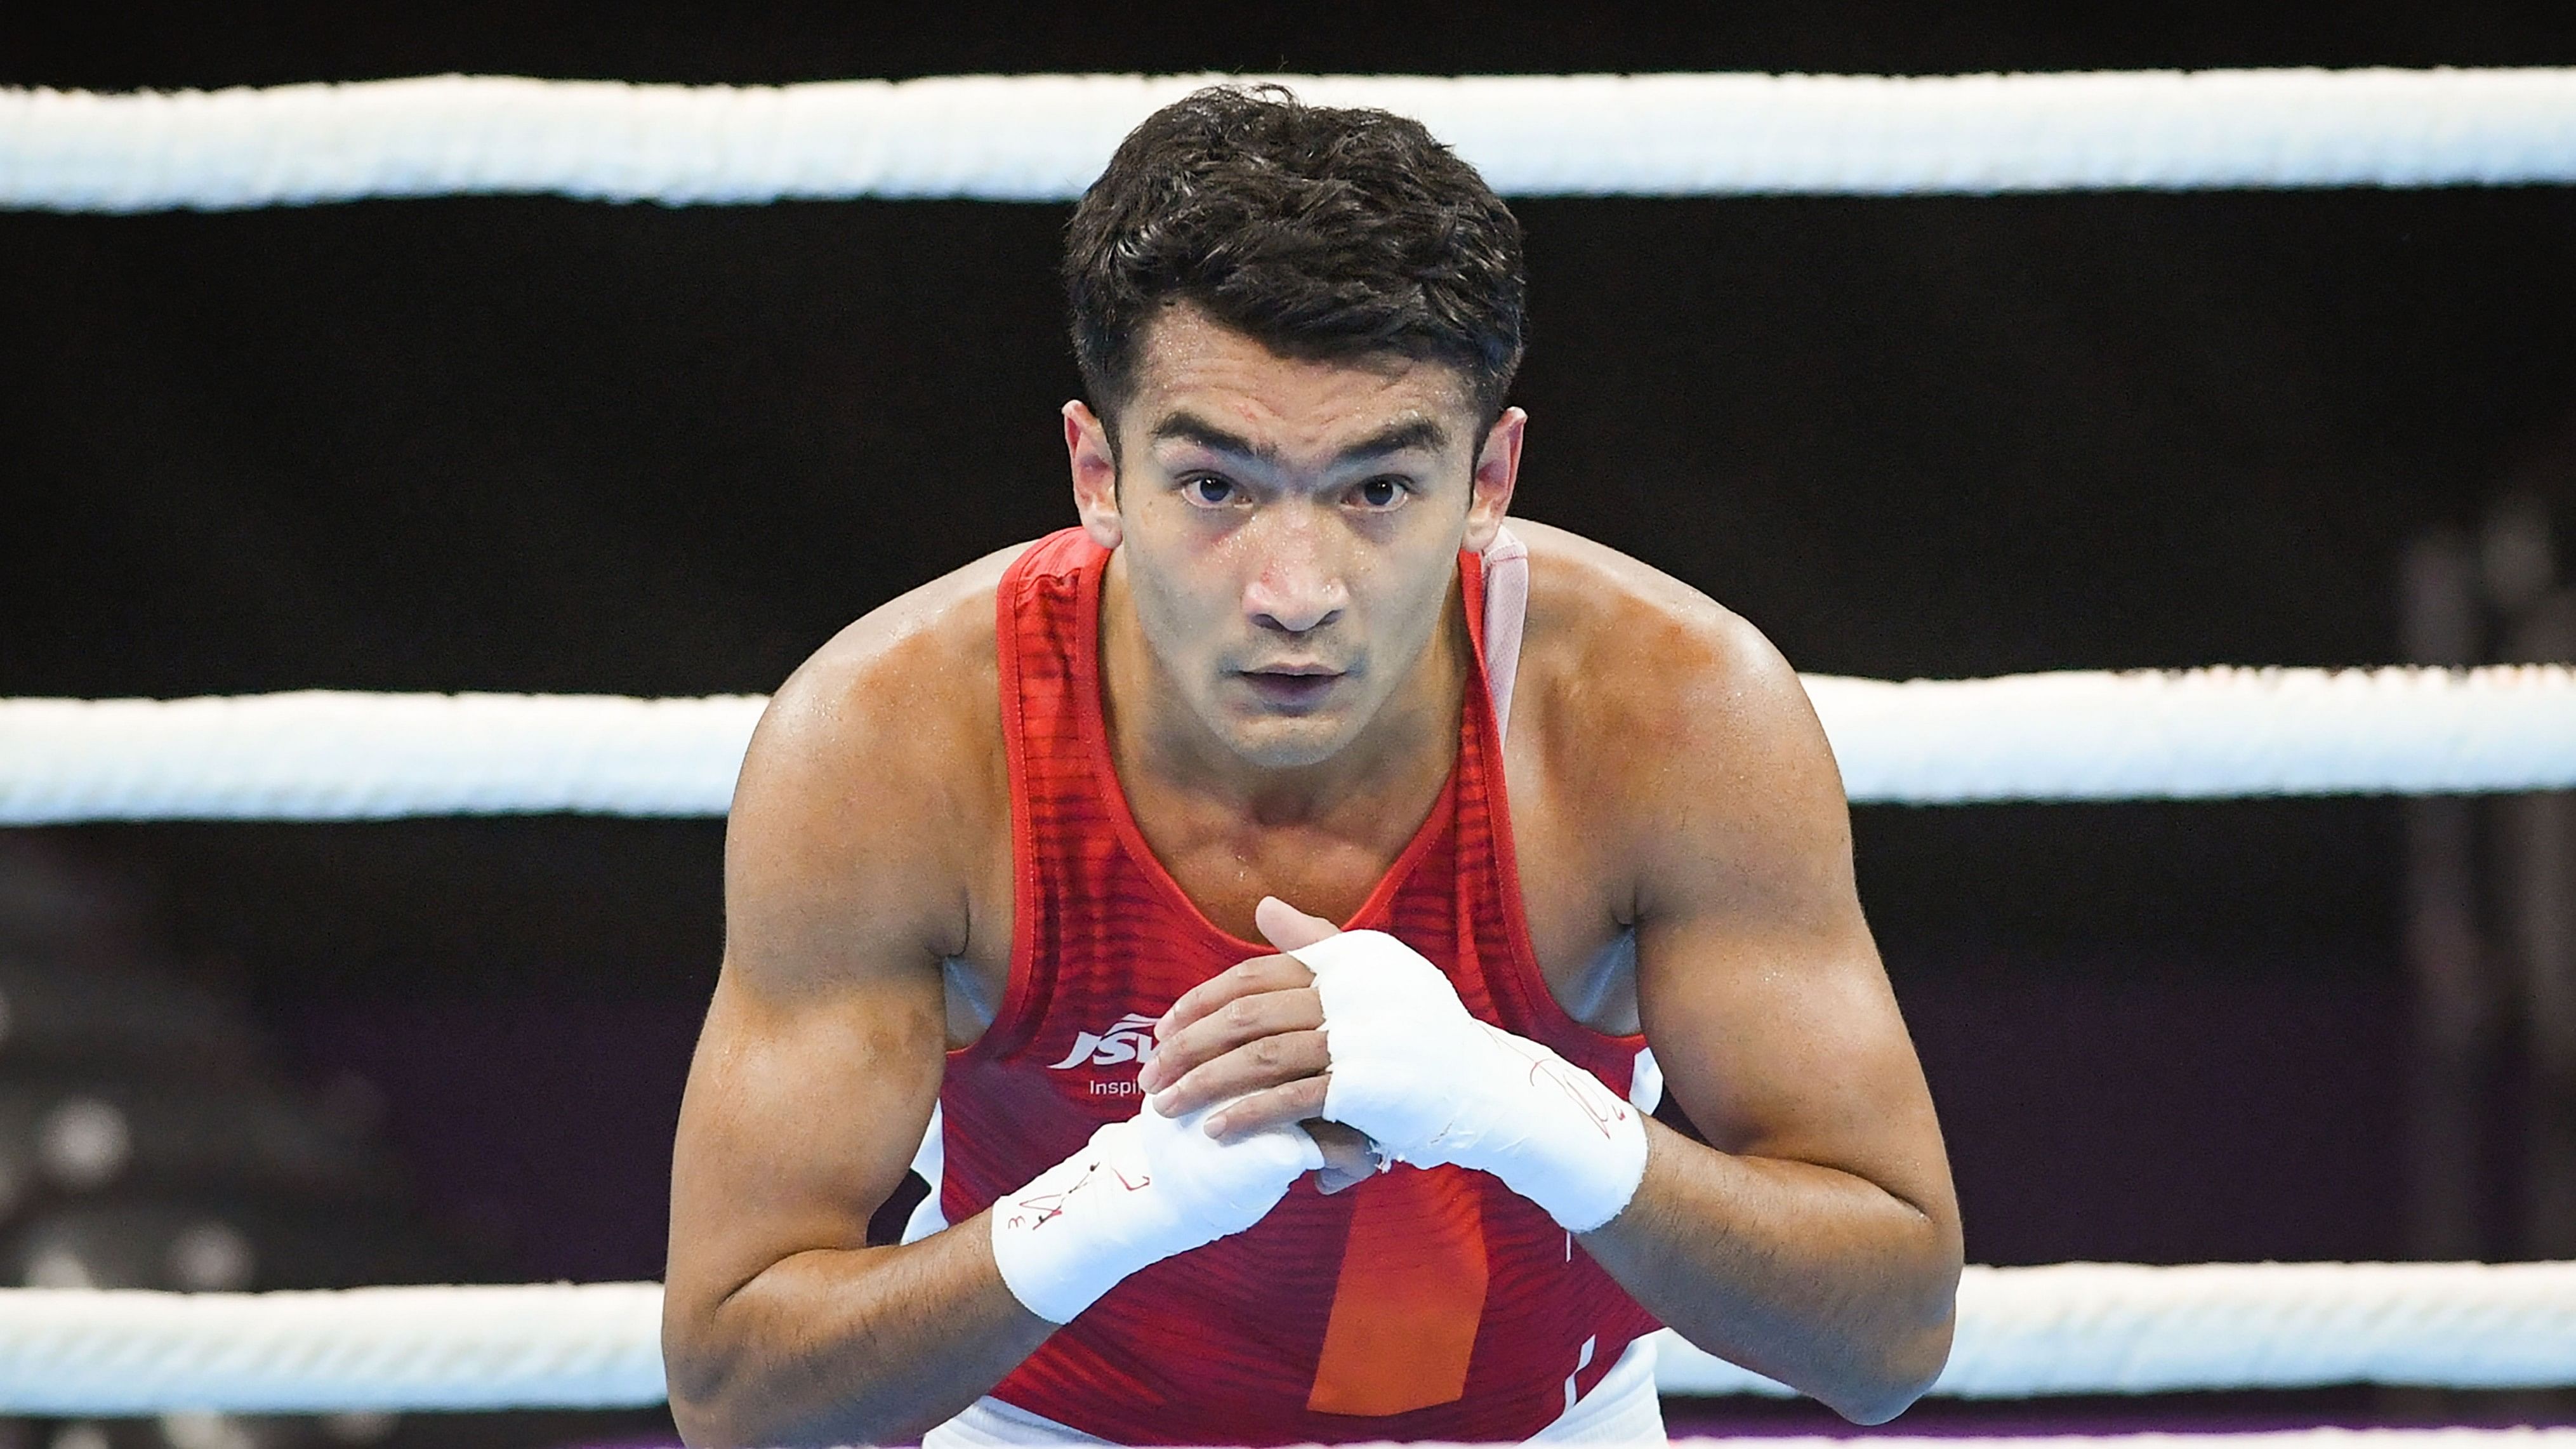 <div class="paragraphs"><p>Veteran Shiva Thapa, who competes in the 63.5kg, has not been at his best for some time now. The 29-year-old failed to win medals at the Commonwealth Games and World Championships.</p></div>